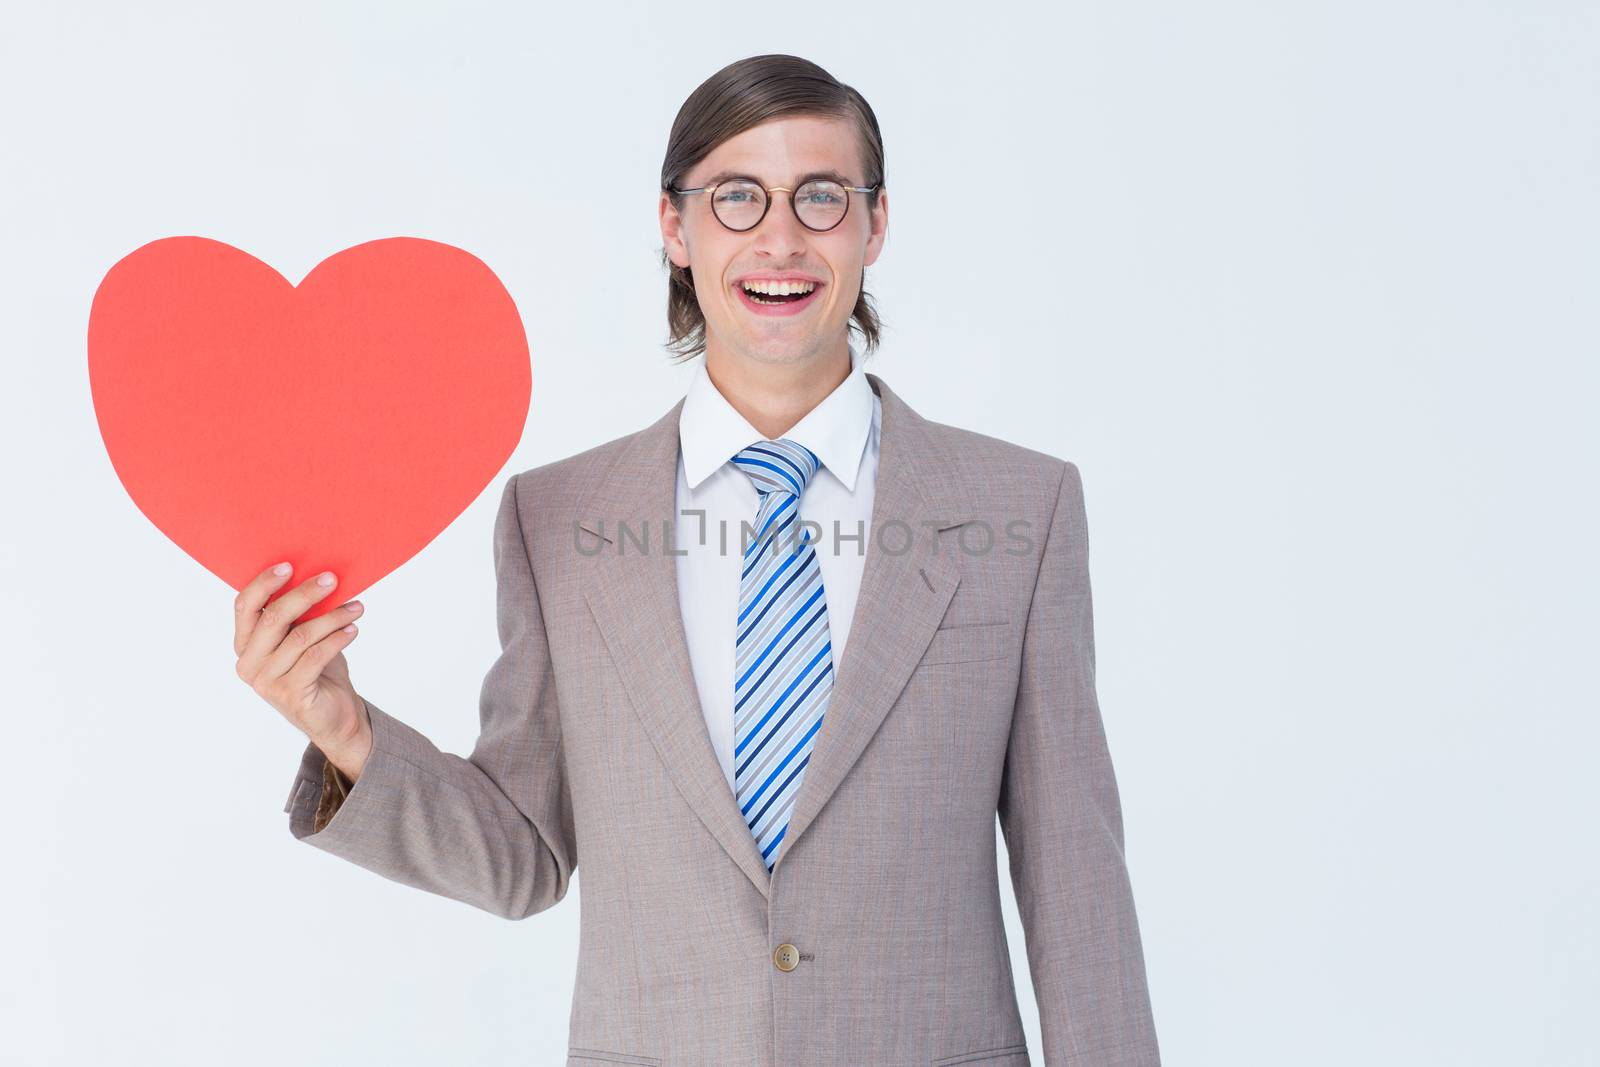 Geeky businessman smiling and holding heart card  by Wavebreakmedia